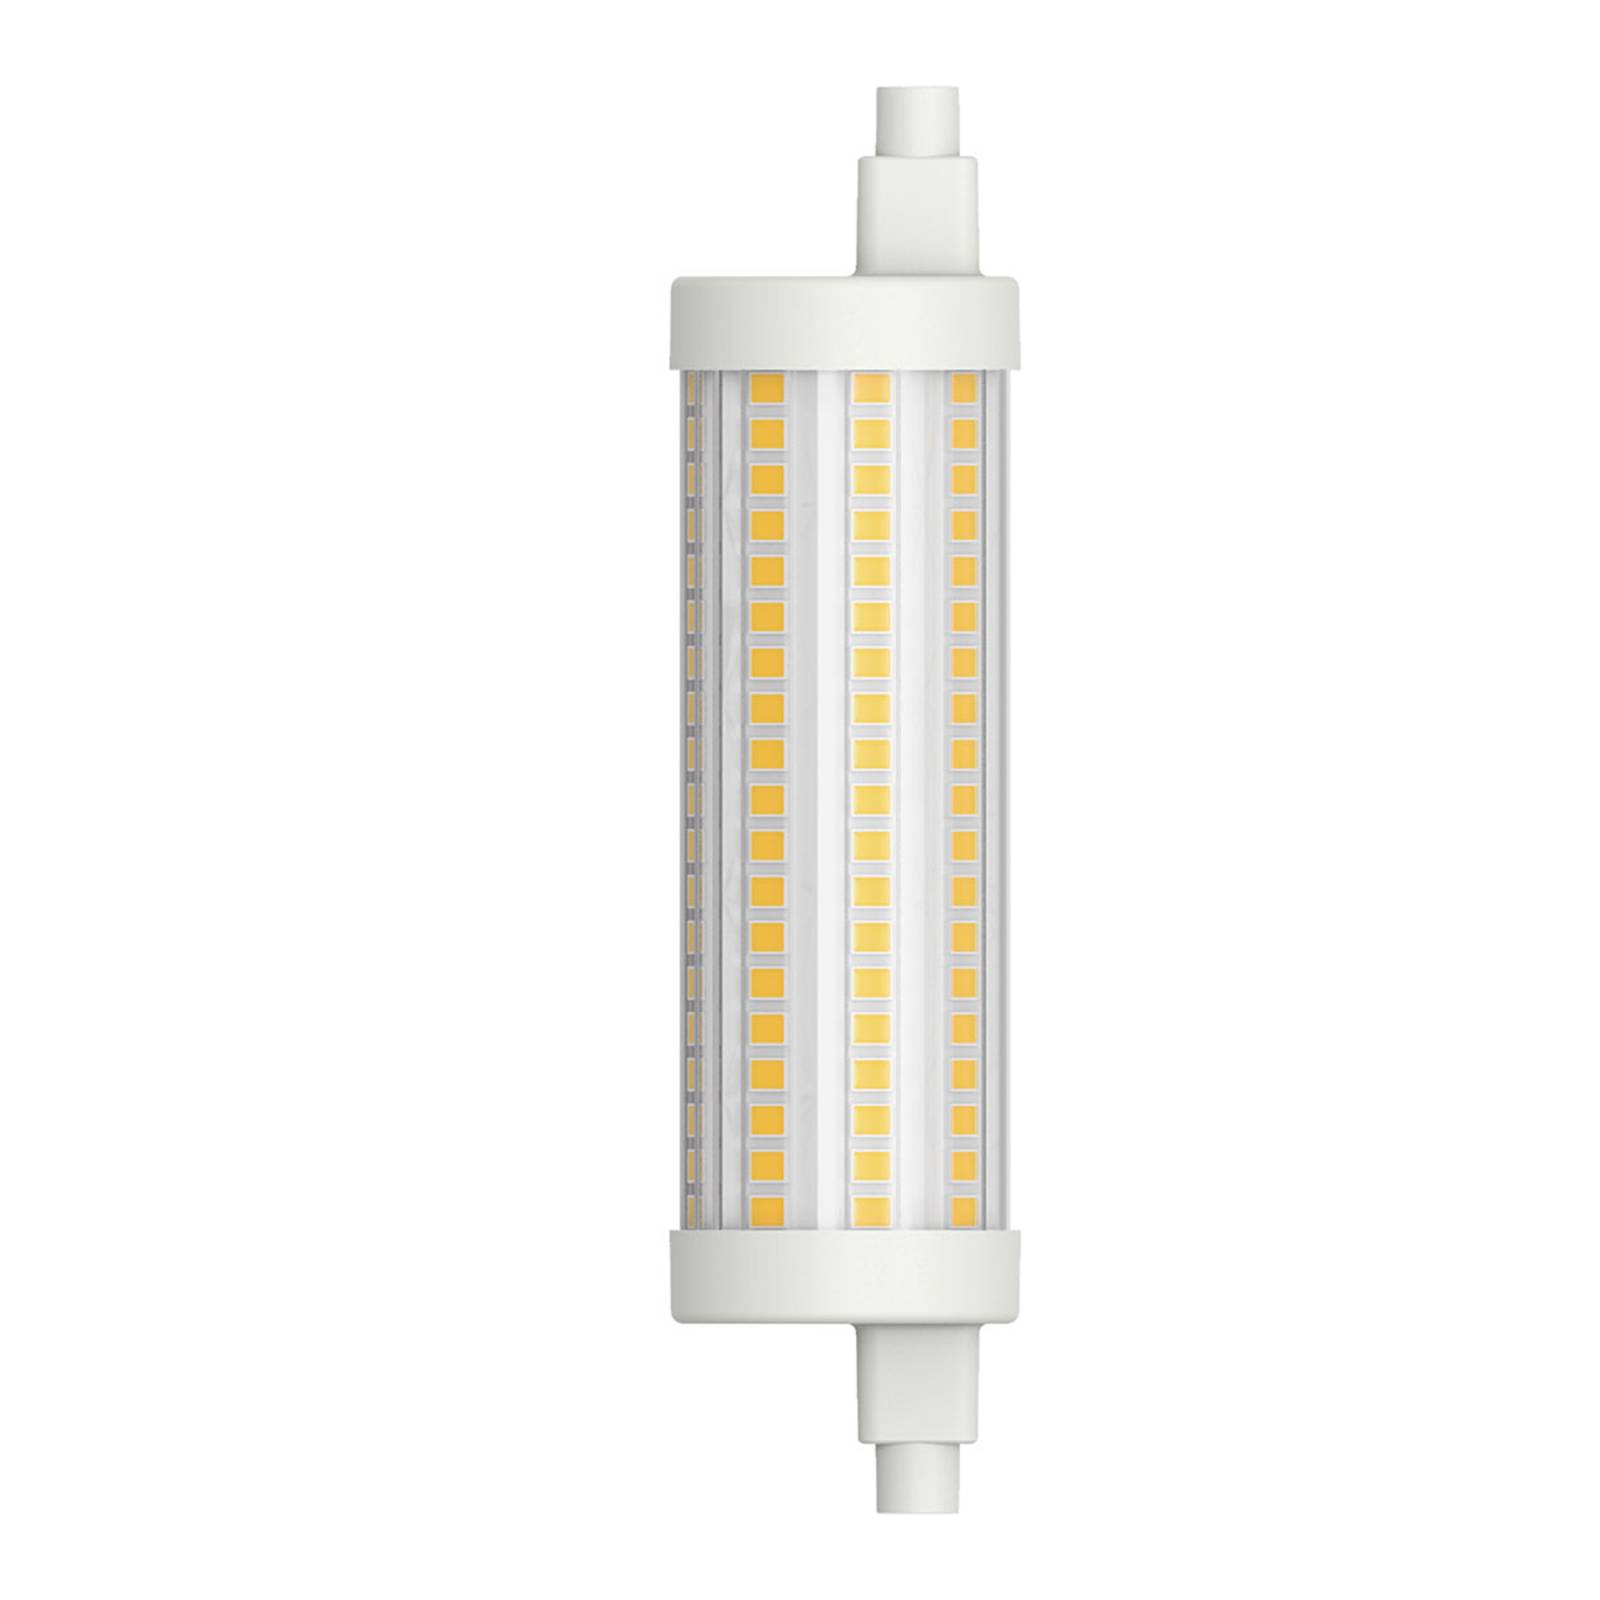 Müller-Licht Tube LED R7s 117,6 mm 12W blanc chaud dimmable